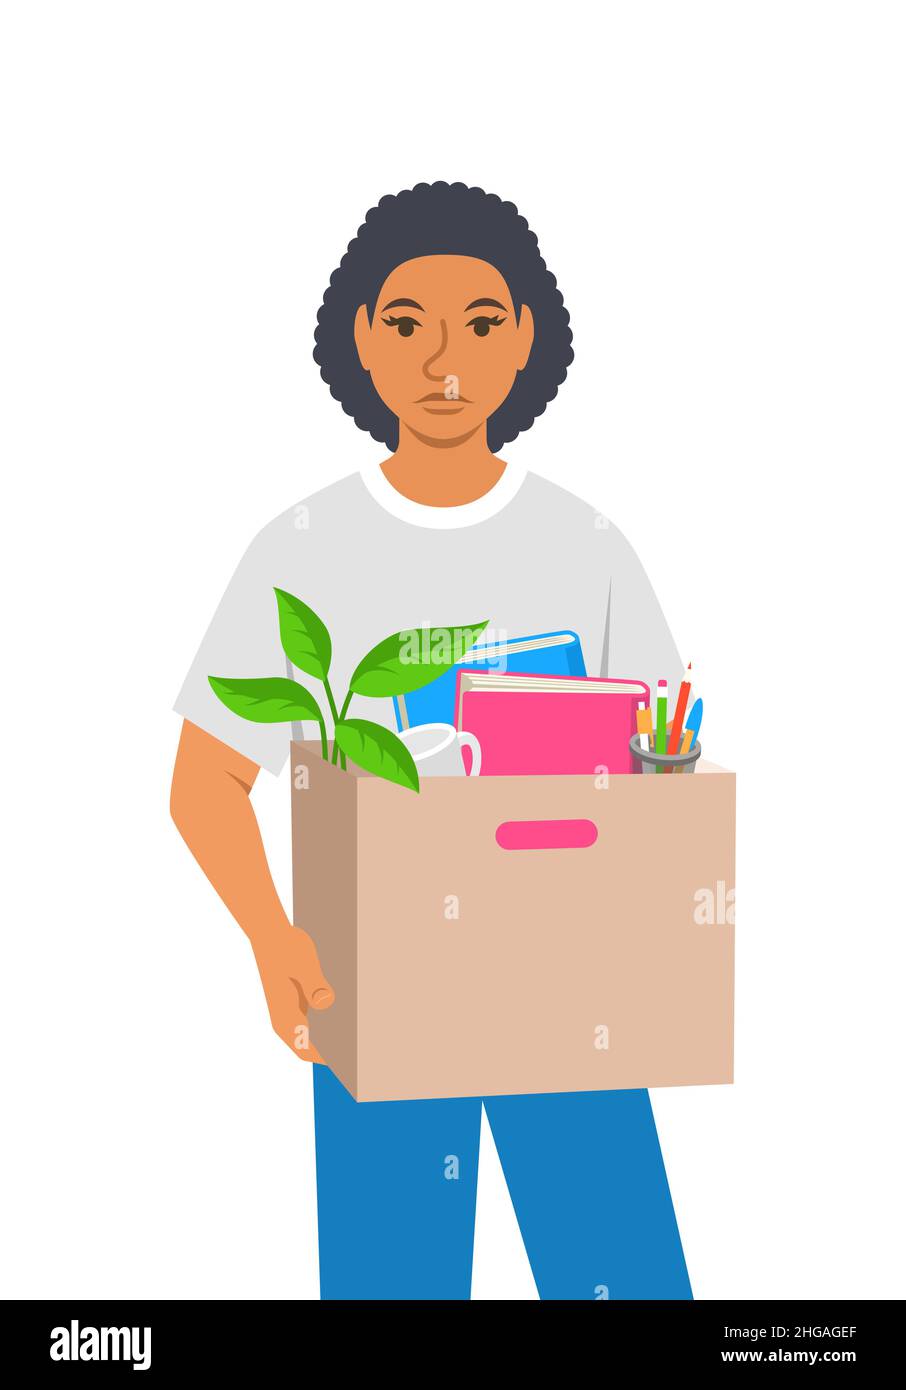 Unemployed fired black woman. Sad jobless girl holds box with personal stuff. Unhappy upset face worried about job loss. Unemployment during the econo Stock Vector